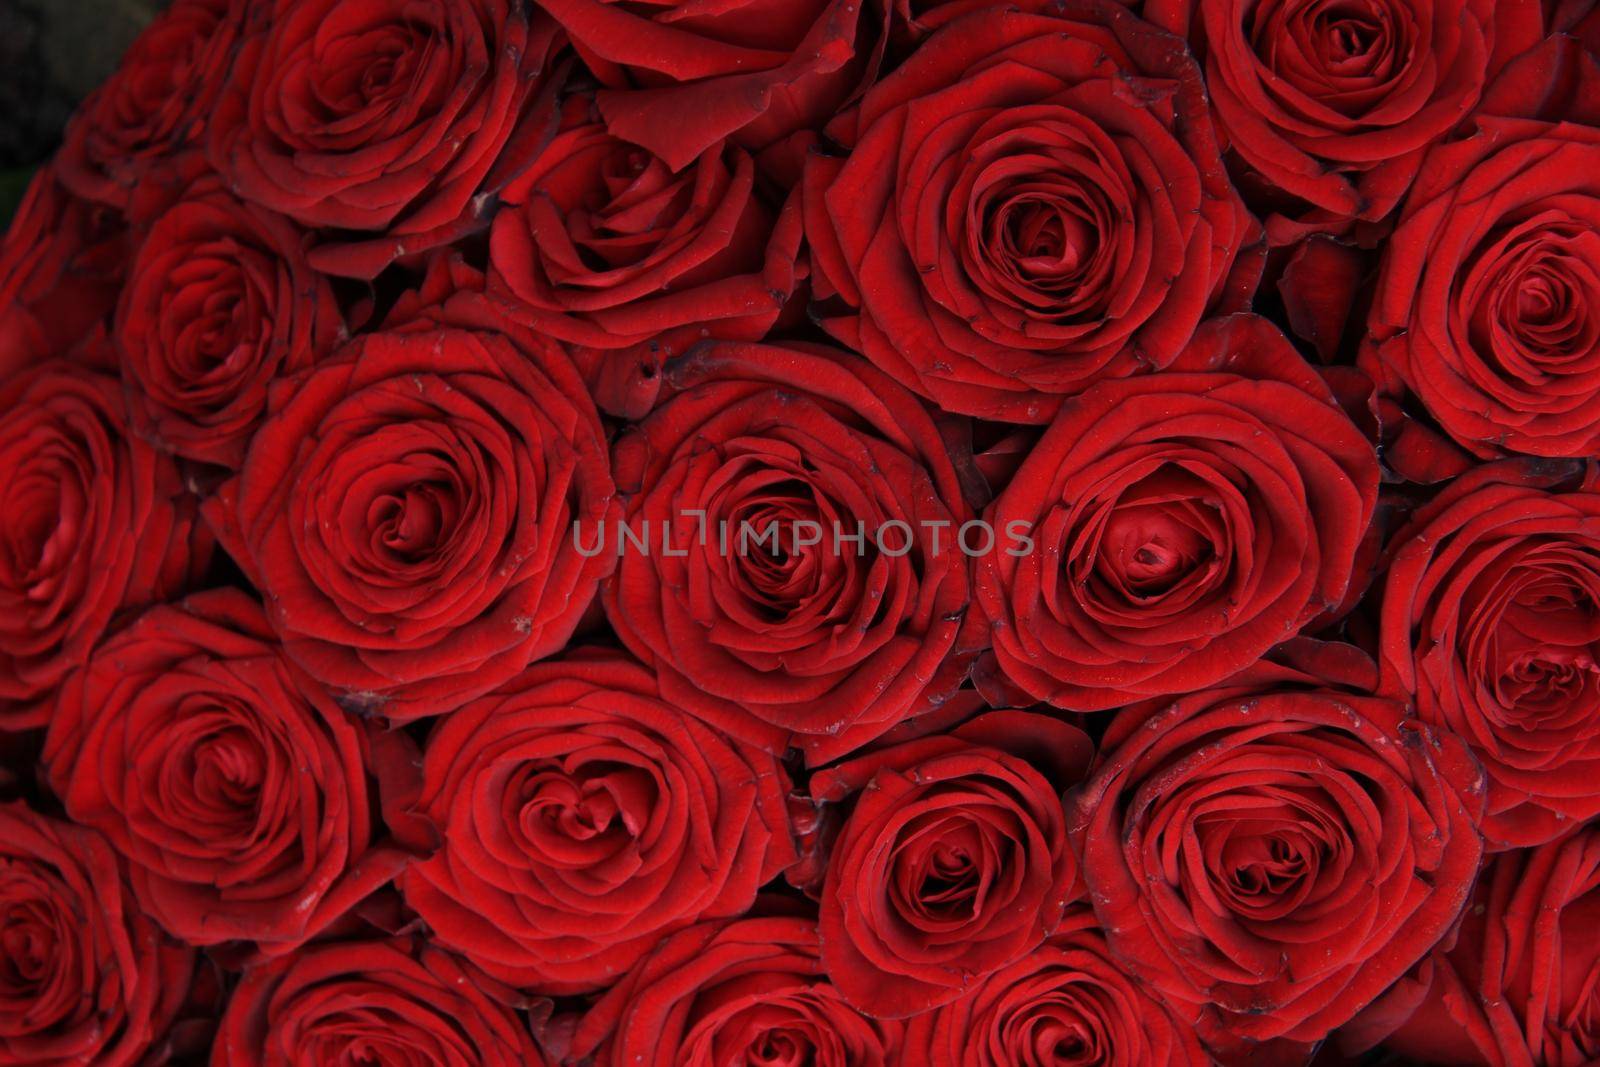 Red roses in a bridal bouquet by studioportosabbia